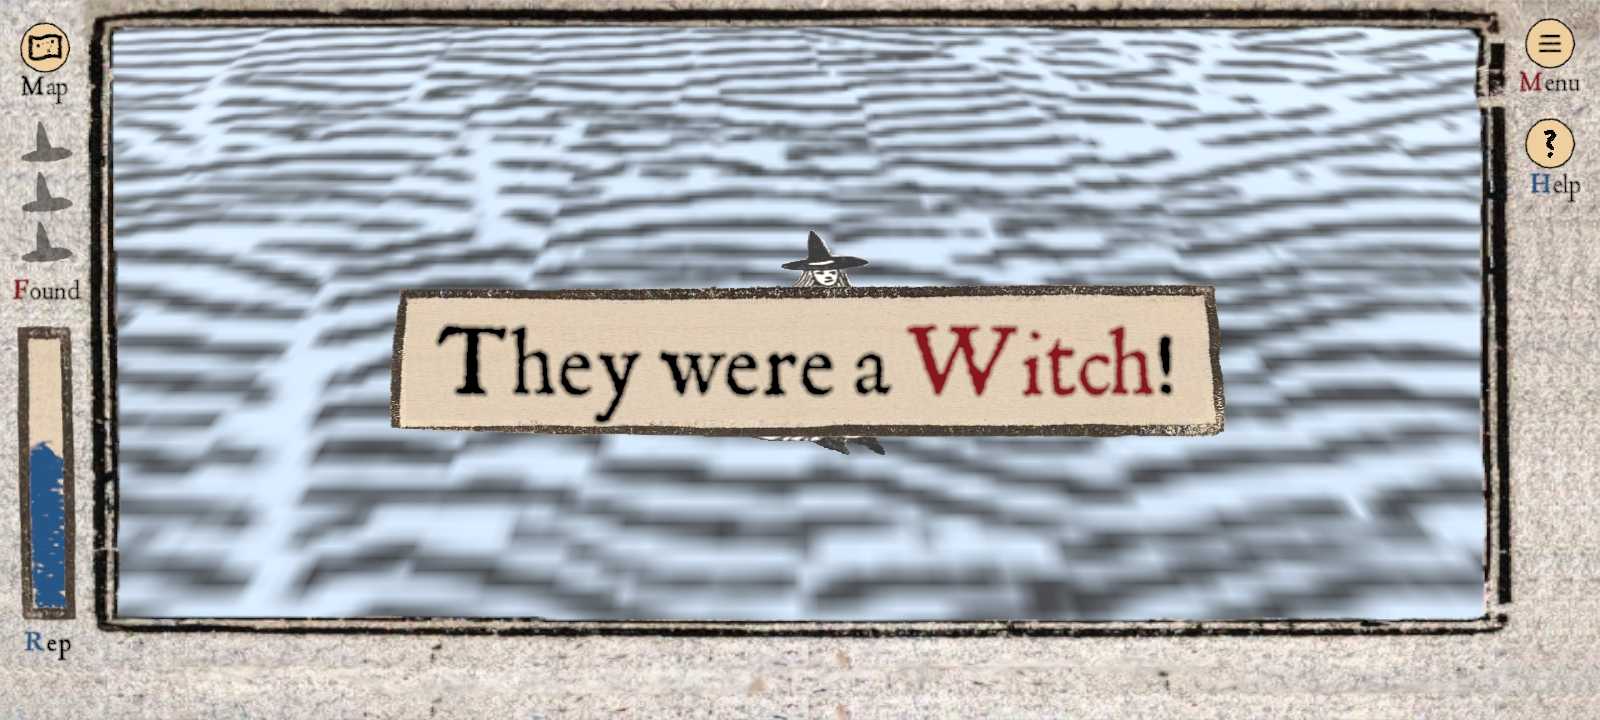 A screenshot from Which is Witch depicting a successful accusation of a witch. Large text is displayed on the screen that says 'They were a Witch' and a witch can be seen floating in paper-looking water behind the text.